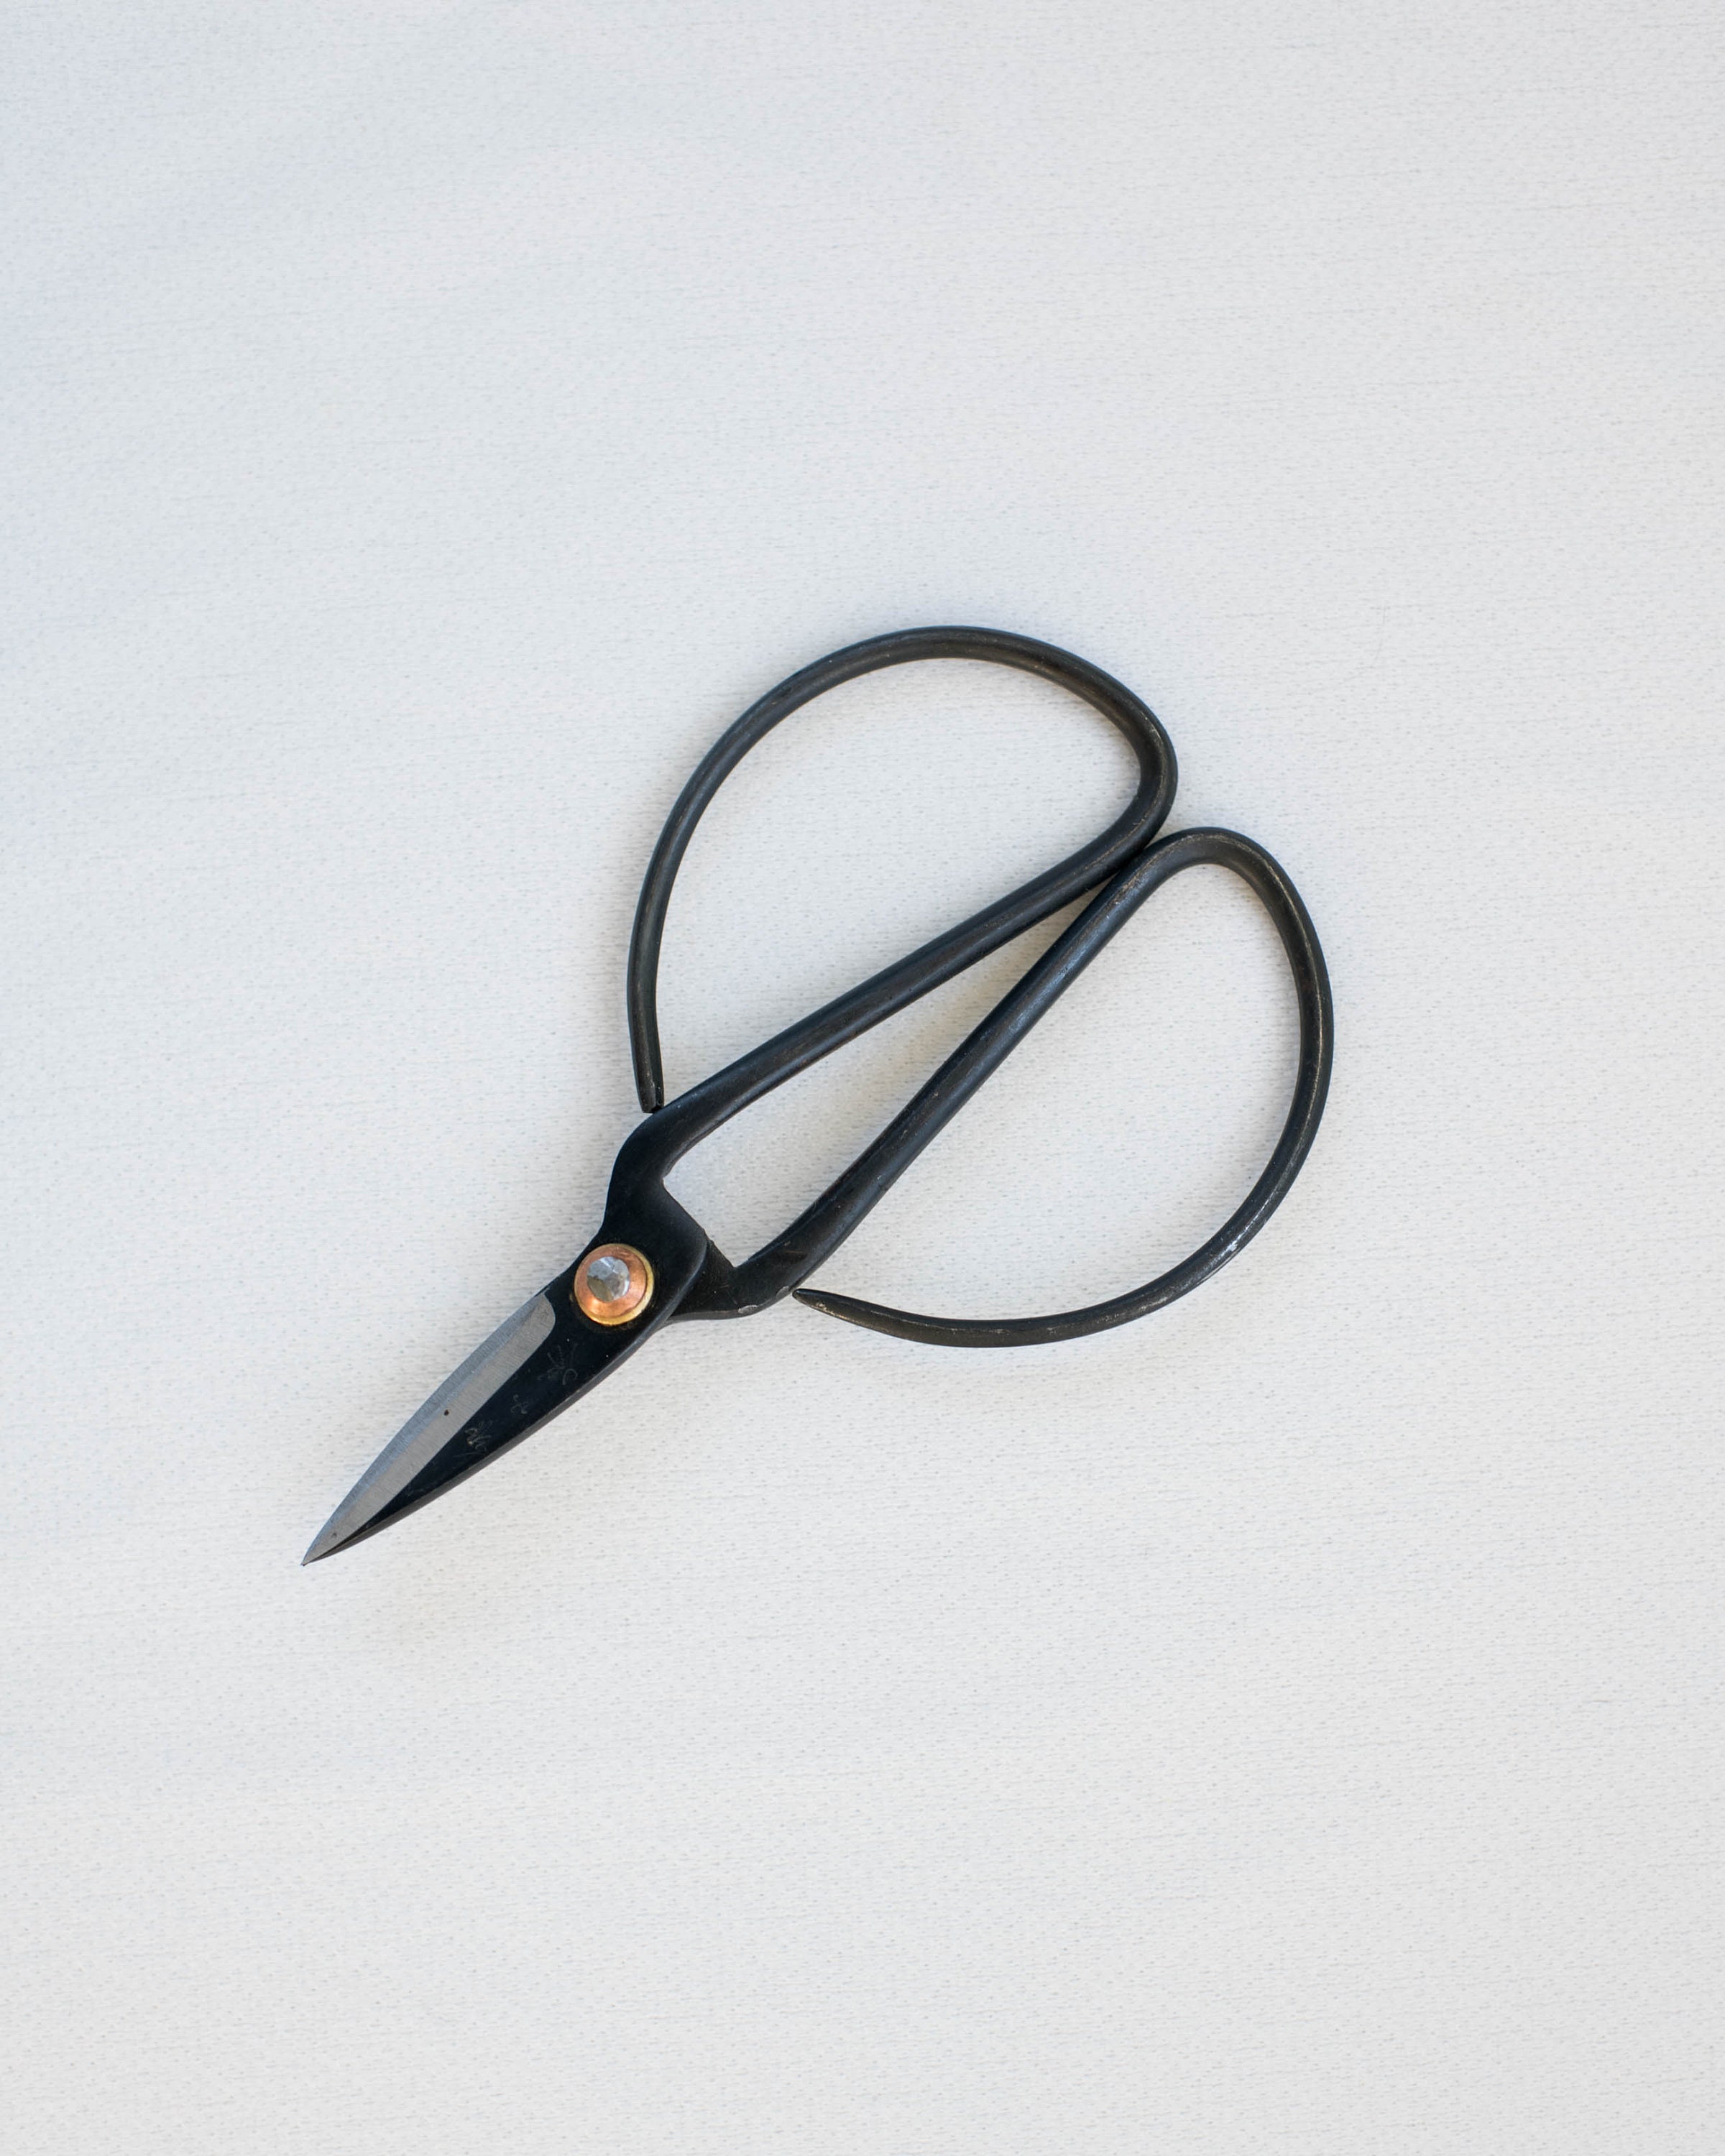 Mini Folding Scissors - Attach to Badge Reel or Keychain - Small but Sharp